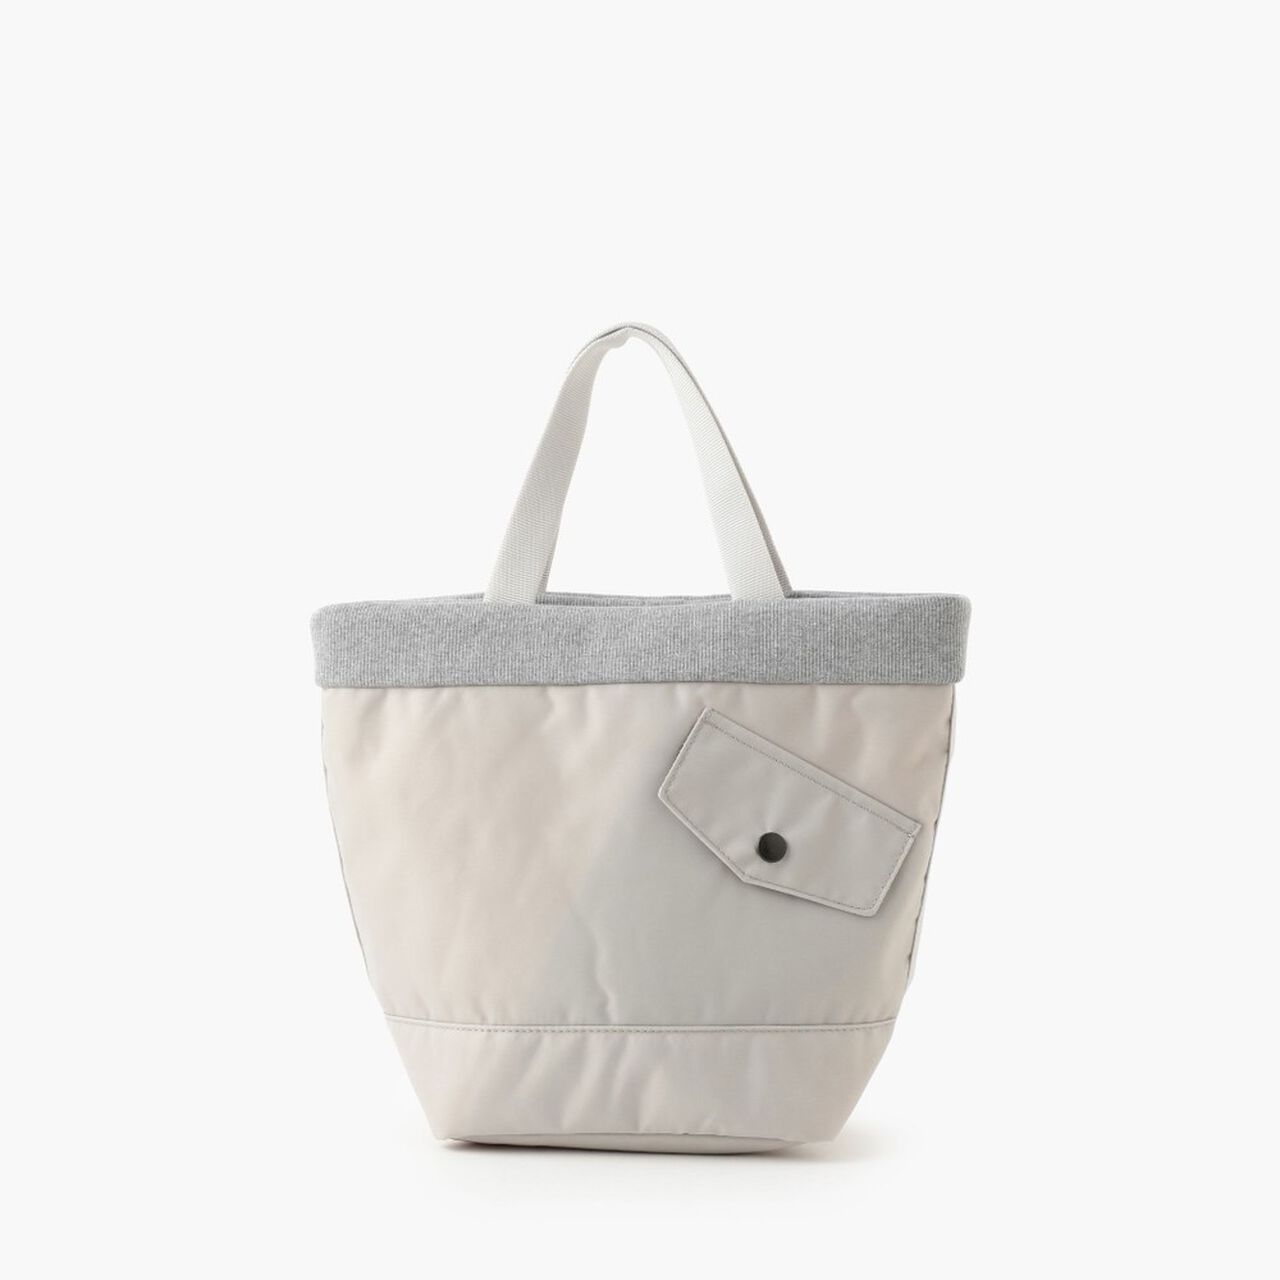 TILT TALL TOTE,Gray, large image number 0